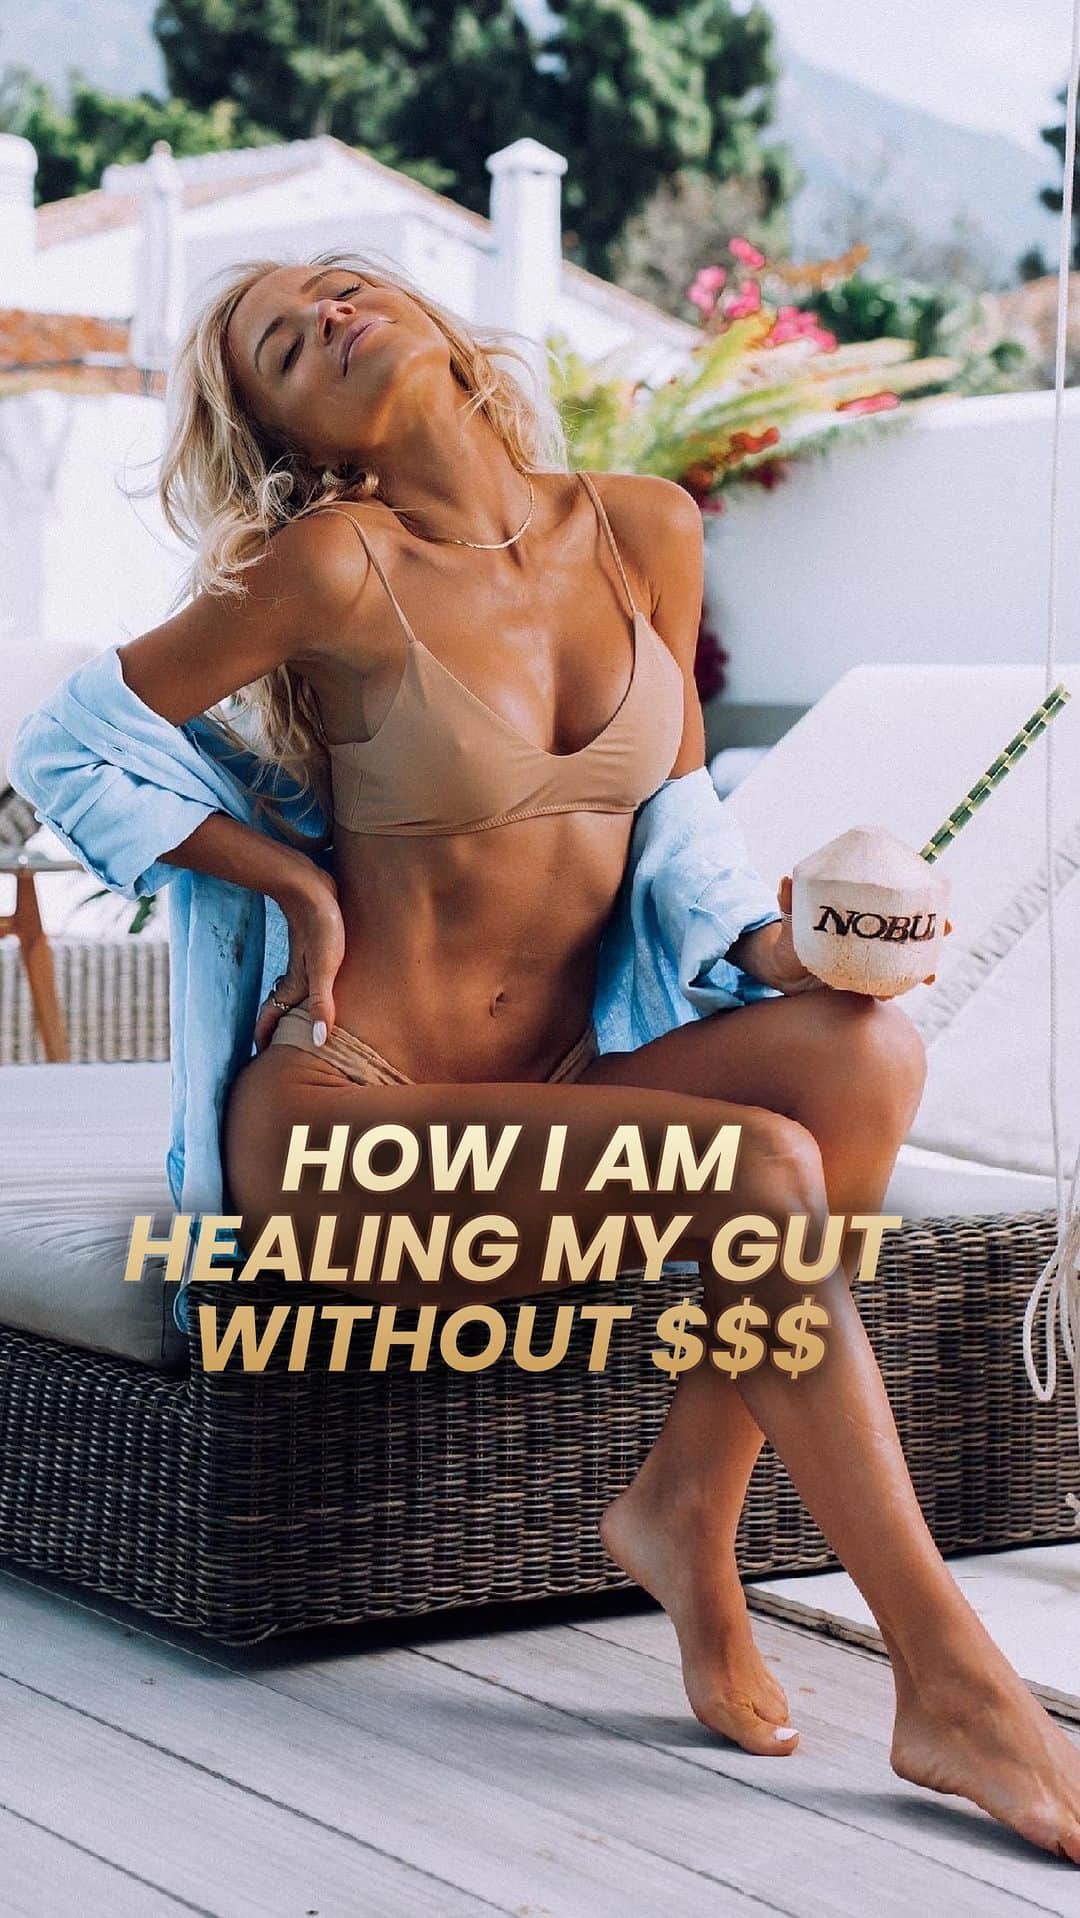 アギーのインスタグラム：「YOUR GUT IS YOUR BEST ASSET!  ❌ if your gut is unhealthy • you gain weight  • you bloat  • you have allergies and food sensitivities • you can feel depressed • you have low immunity & catch cold all the time • sugar cravings • even migraines!   👩‍👧as women, we pass our gut Microbiome to our children, so that’s even more important to take care of it!!  Parasite infection, compounded with E. coli, and a round of antibiotics is like a nuclear bomb for my gut 💣 (the infection comes from basically people not washing their hands after going to the bathroom 🤢)  I need to heal it!  ✅ how to heal Your gut in the order of how expensive it is:  💰Right now, I’ll go carnivore for a week but I don’t think this diet is good for anyone long term. I’ll then work to include Probiotic Foods: naturally fermented foods like yogurt, sauerkraut, kimchi, and kefir into your diet.  💰Fiber Intake: Eat a diet high in fiber & aim for 30grams a day!  💰Limit Sugar and Processed Foods: Reducing sugar and processed foods can prevent the overgrowth of undesirable bacteria in the gut.  💰Stay Hydrated: Drinking enough water benefits the mucosal lining of the intestines and promotes the balance of good bacteria.  💰 Stress Less: Activities like meditation, yoga, and deep breathing can mitigate stress, which negatively impacts gut health.  💰💰Bone Broth or Collagen Supplements (Expensive):** Bone broth is rich in amino acids that can help repair the gut lining. Collagen supplements, although pricier, offer a concentrated source.  💰💰💰Quality Probiotic Supplements: Invest in a good quality probiotic supplement that provides a diverse range of beneficial bacteria strains.  💰💰💰 Ozone therapy + Fecal Matter Transplant ( I wish it was more available but this is when they put a fecal matter of another healthy person up your peach 🍑 !) + peptide BPC-157 and maybe helminthic therapy (where you introduce worms 🐛 into your gut)  What would you do??!!   #balibelly #bali #gut #guthealth #biohacking #biohack」